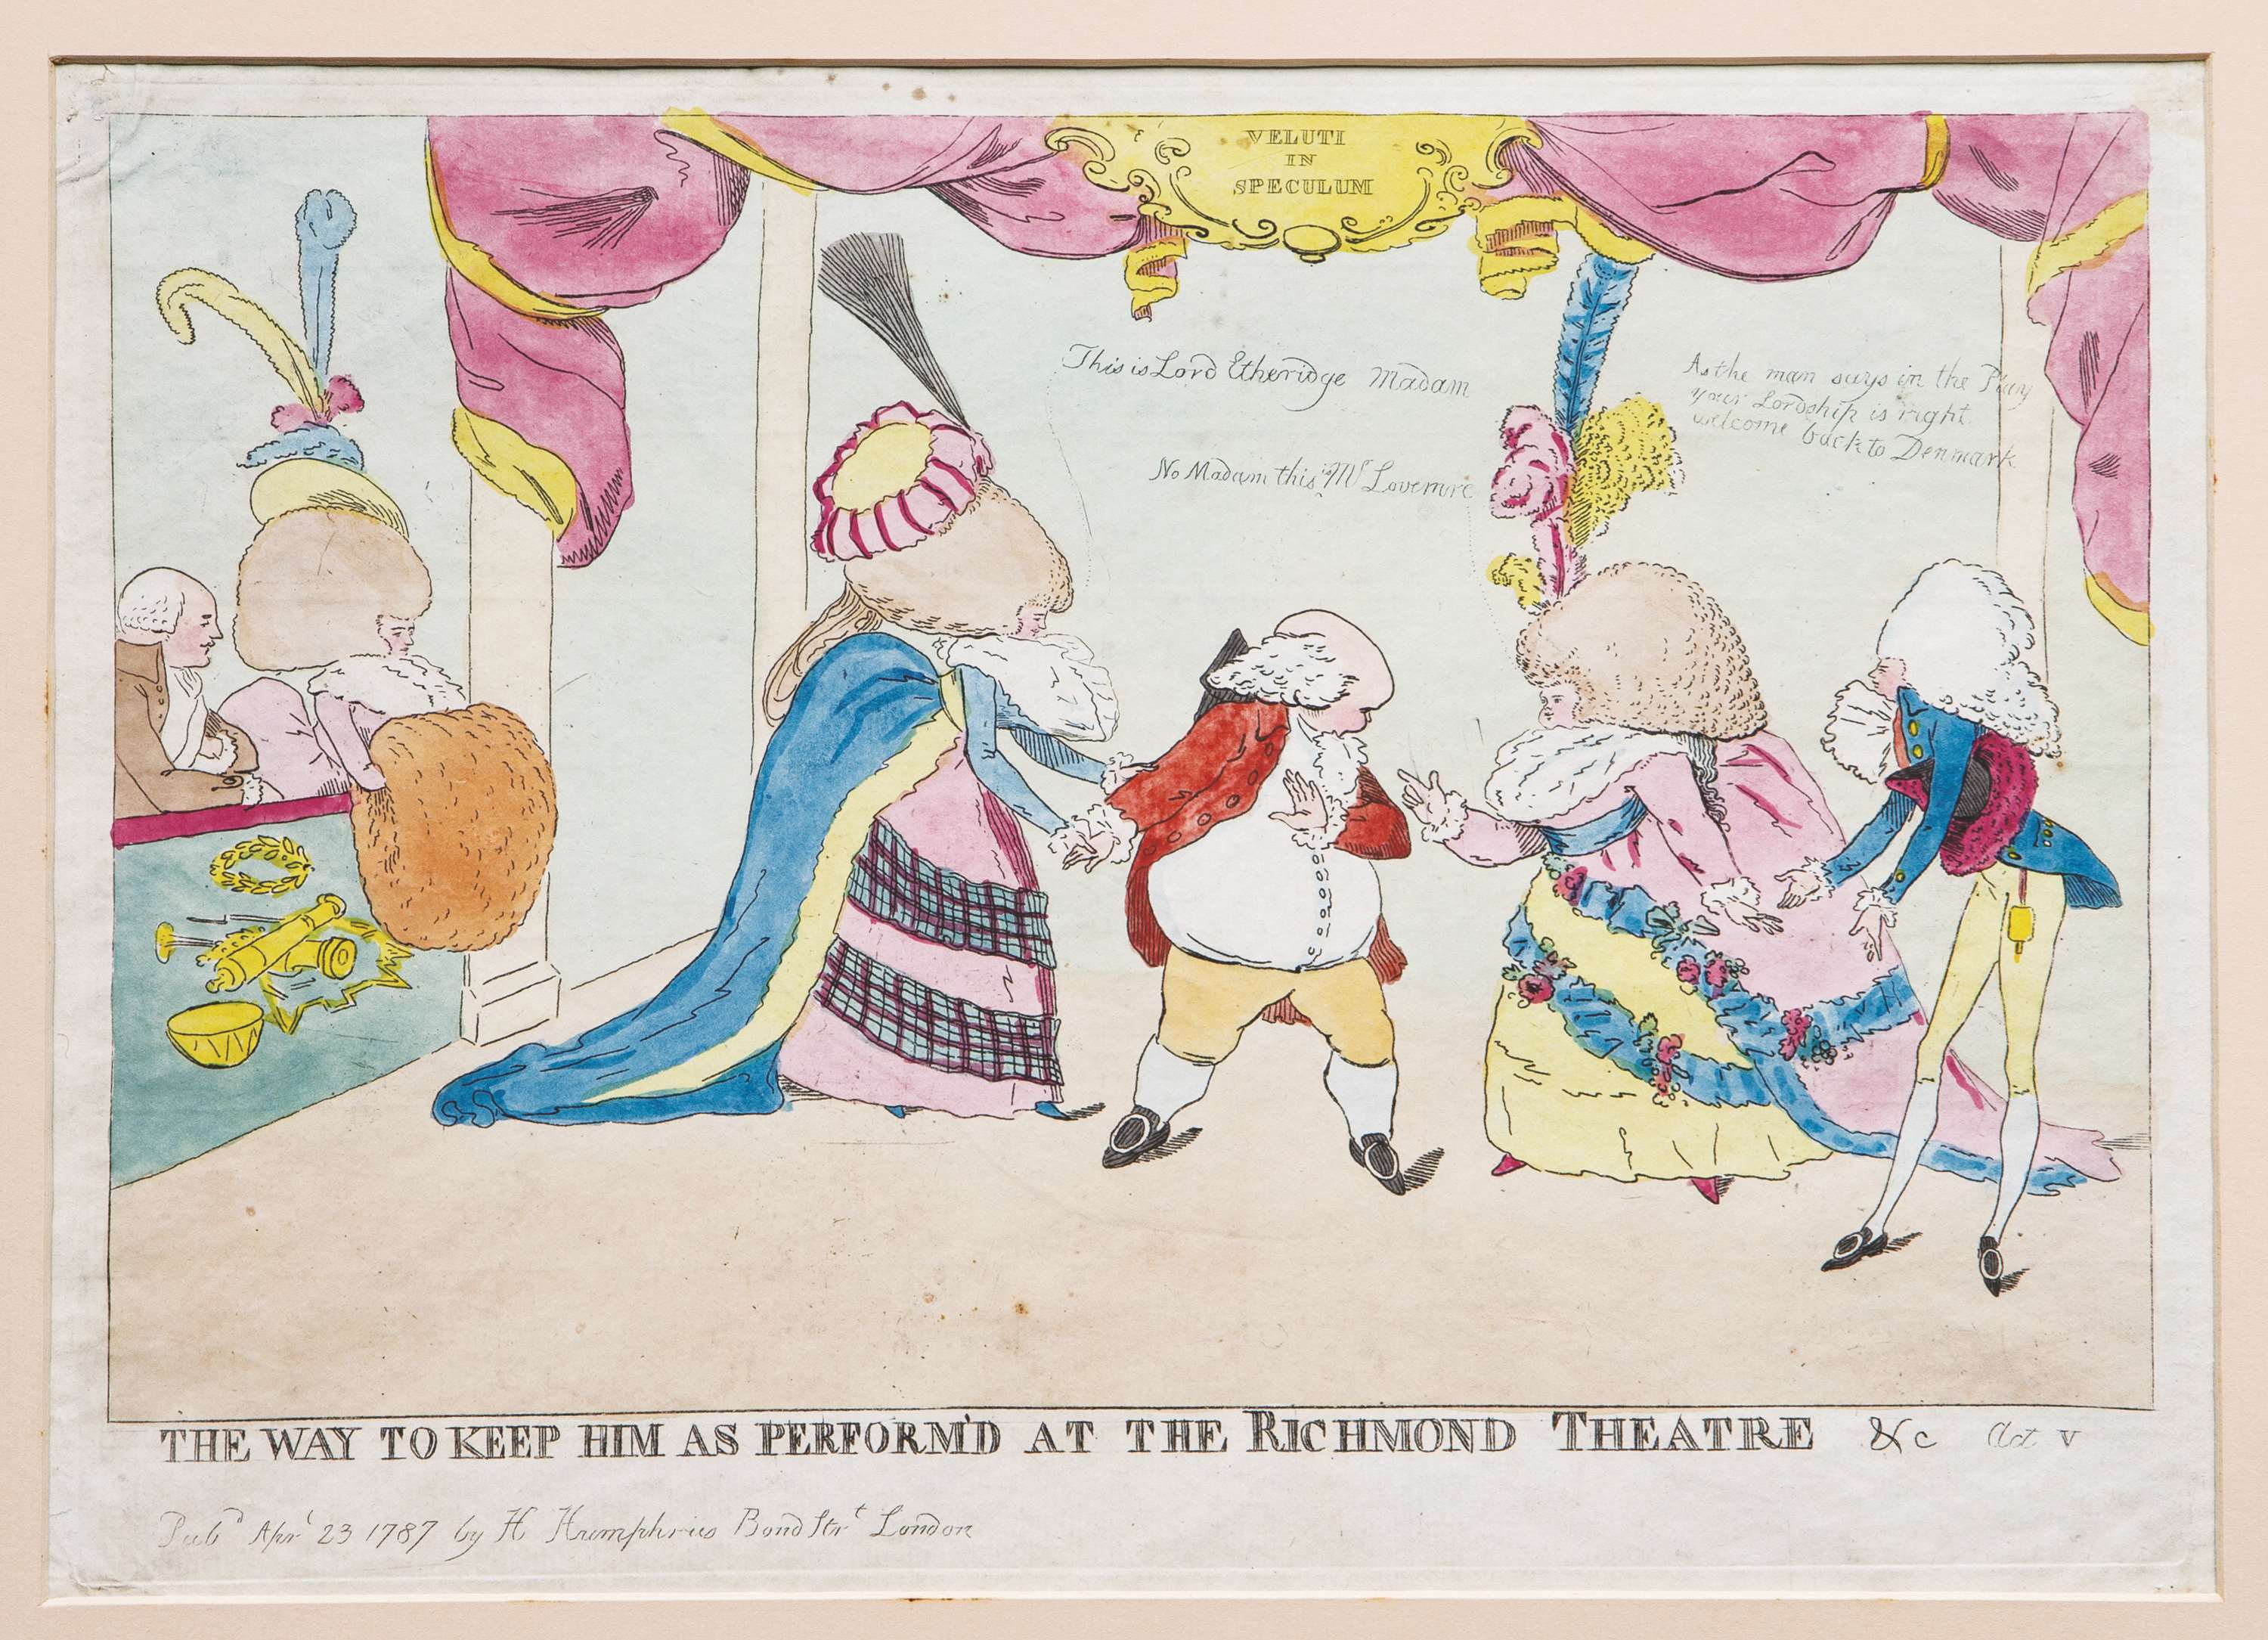 A recent acquisition for the Goodwood Collection – a 1787 cartoon depicting the 3rd Duke and his wife (in the box) at the theatre he had built at his London house, where amateur theatricals were performed to great acclaim